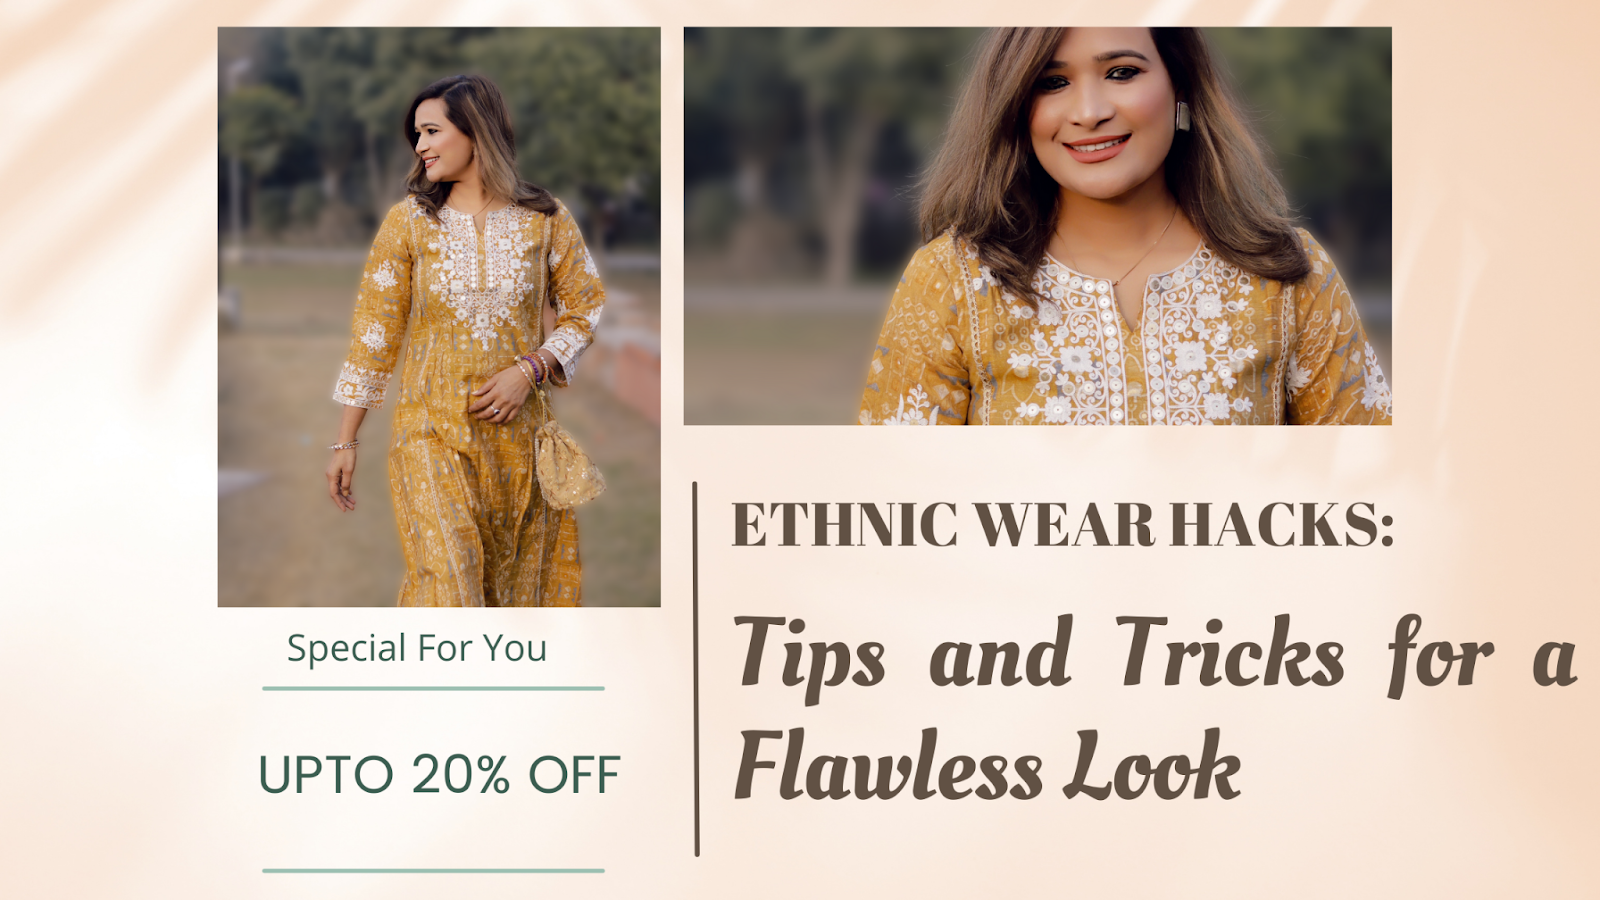 Ethnic Wear Hacks: Tips and Tricks for a Flawless Look